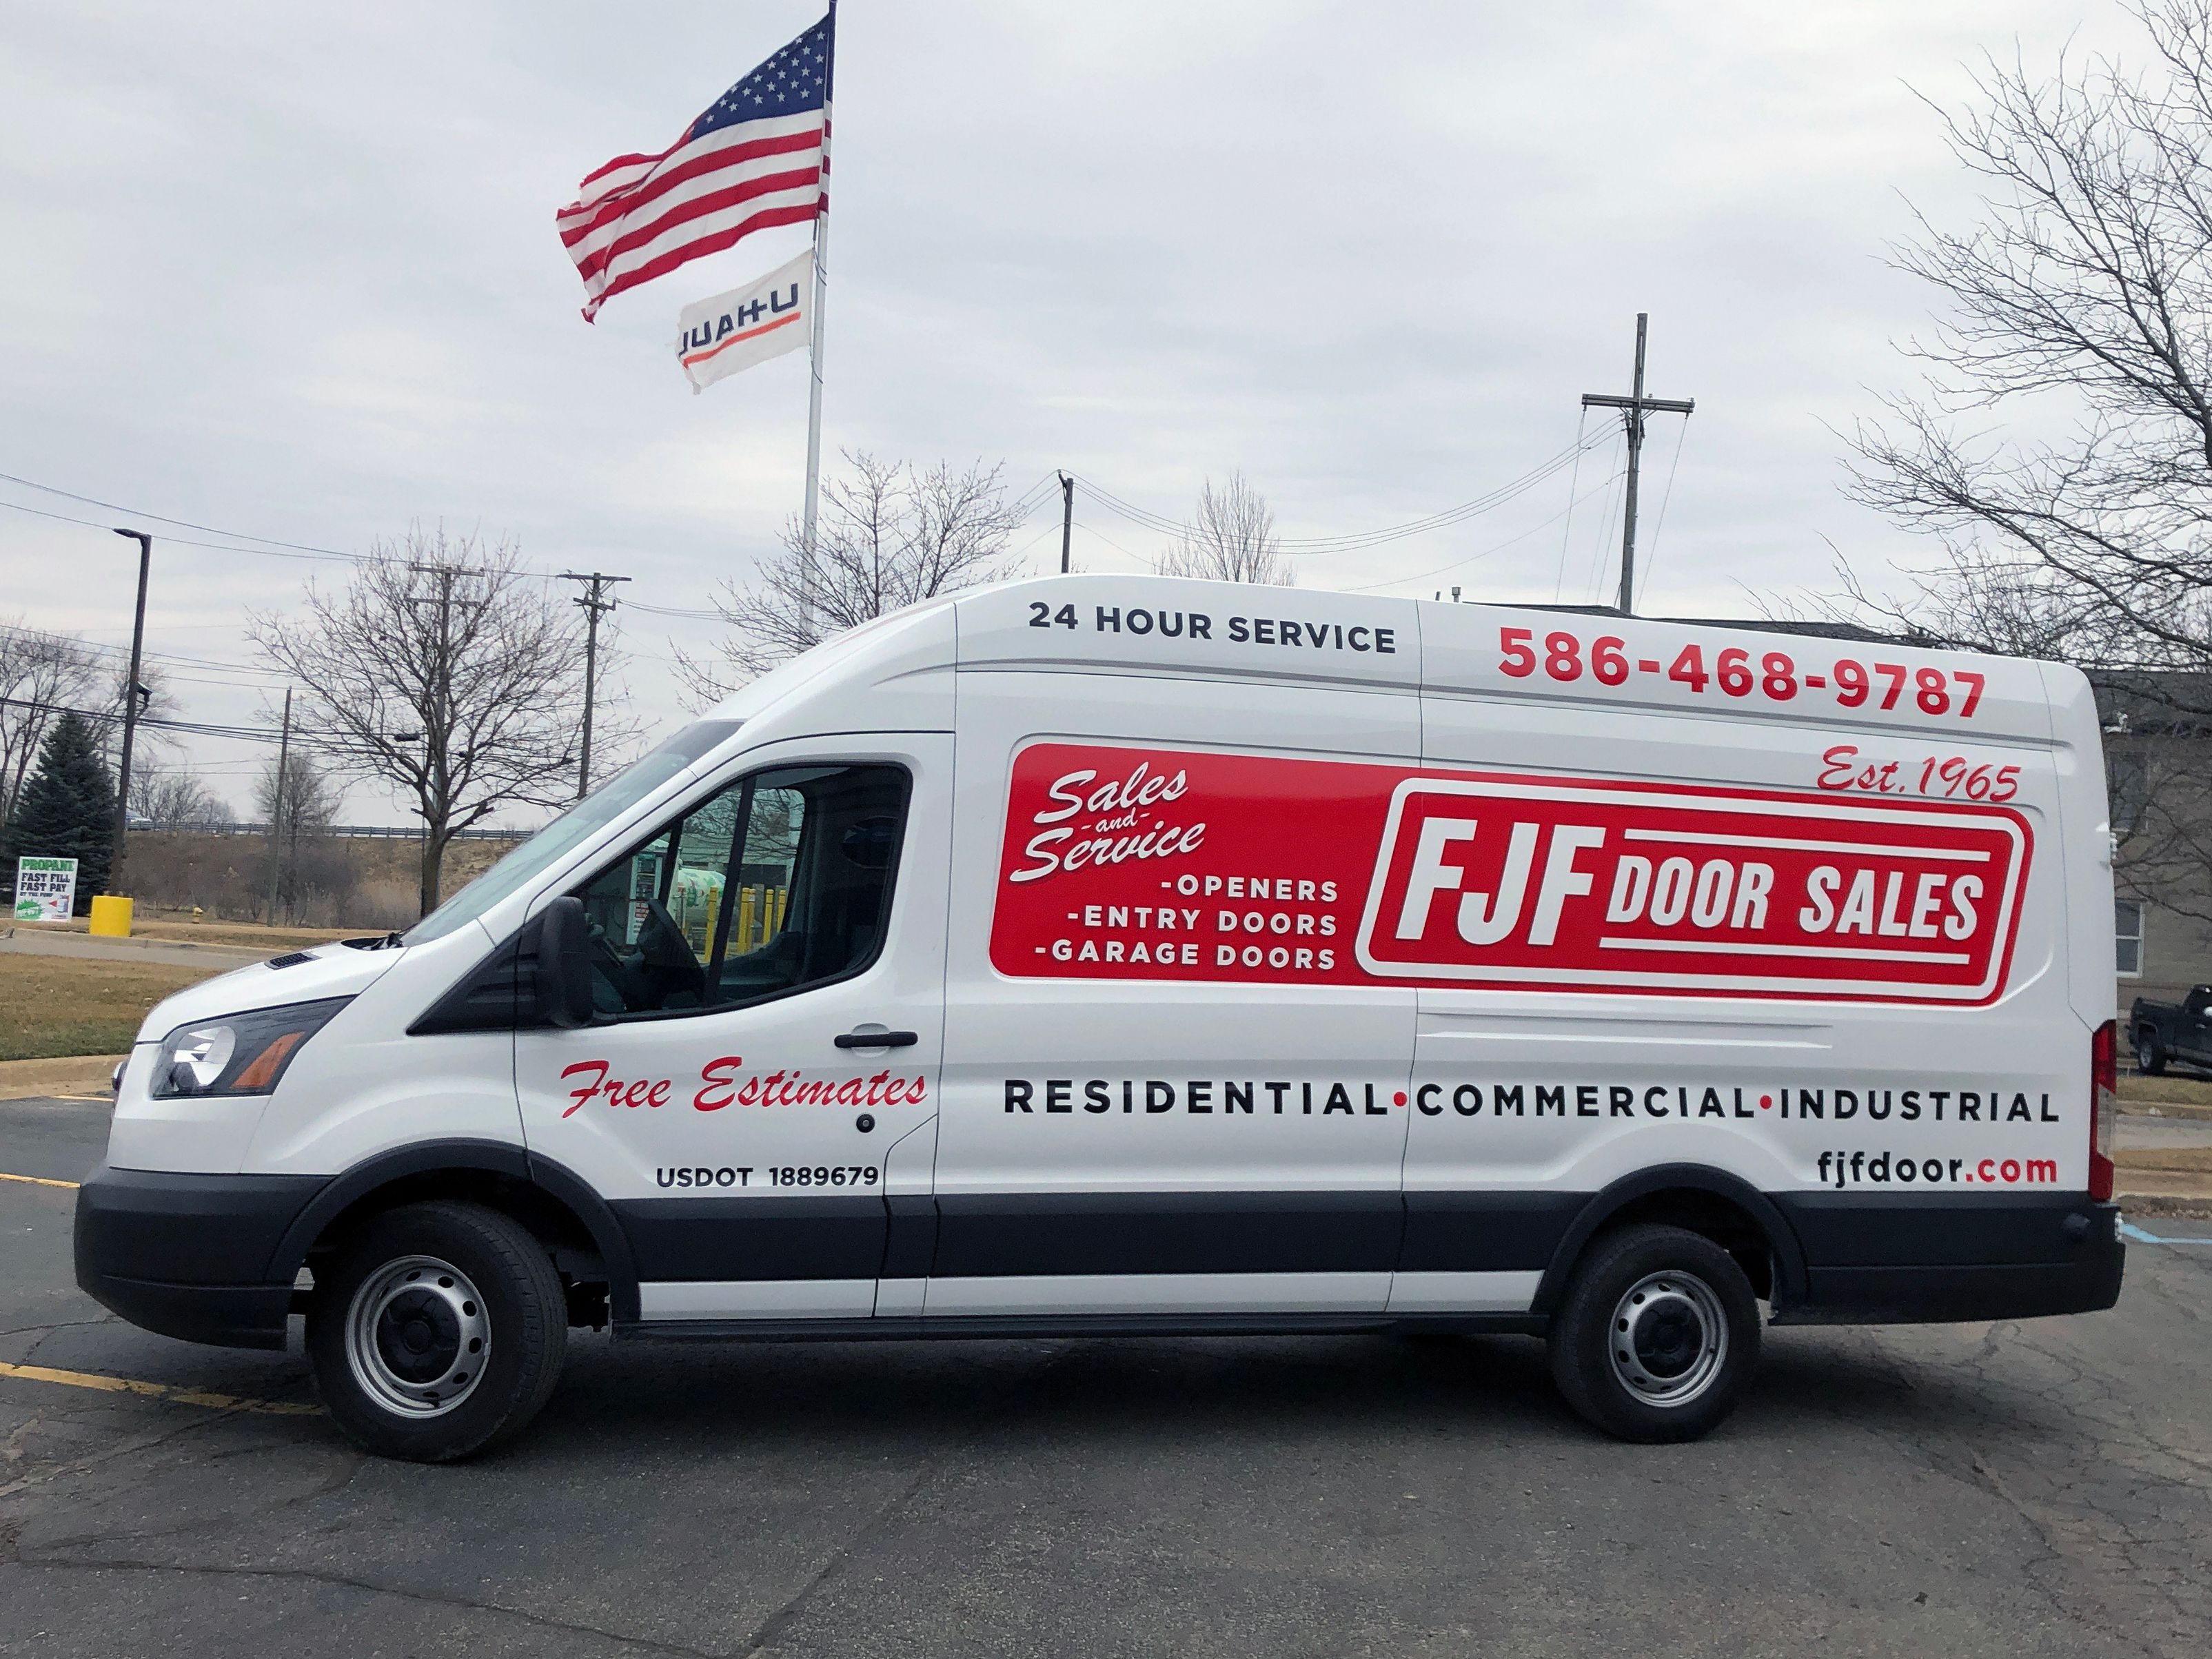 A commercial work van with a custom vinyl wrap with white, blue, and red logos and text